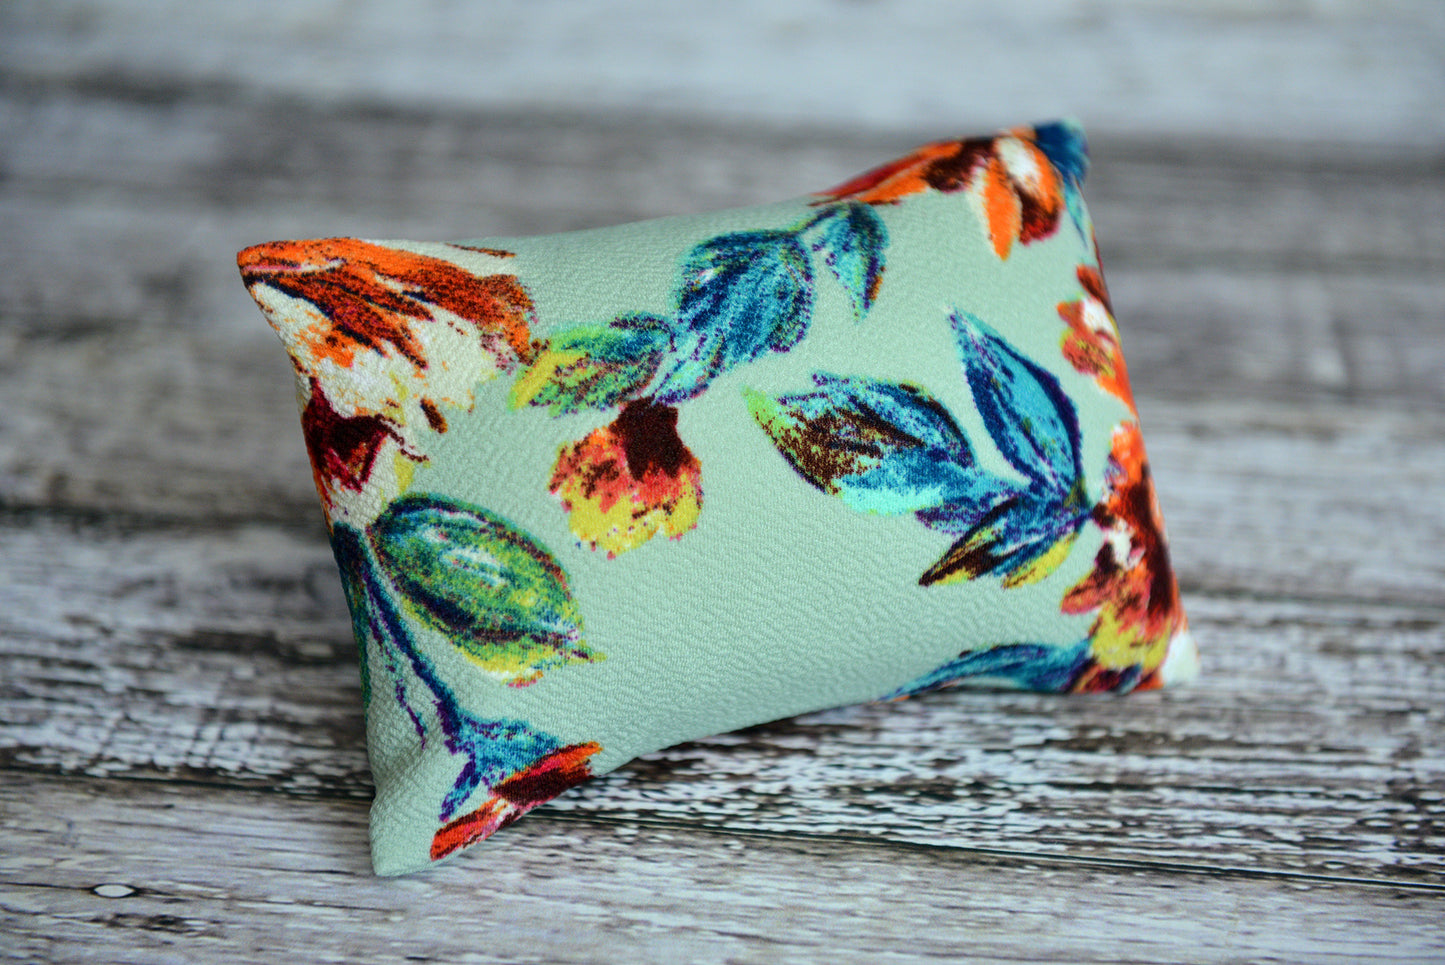 Mini Pillow with Cover - Textured - Floral 6-Newborn Photography Props